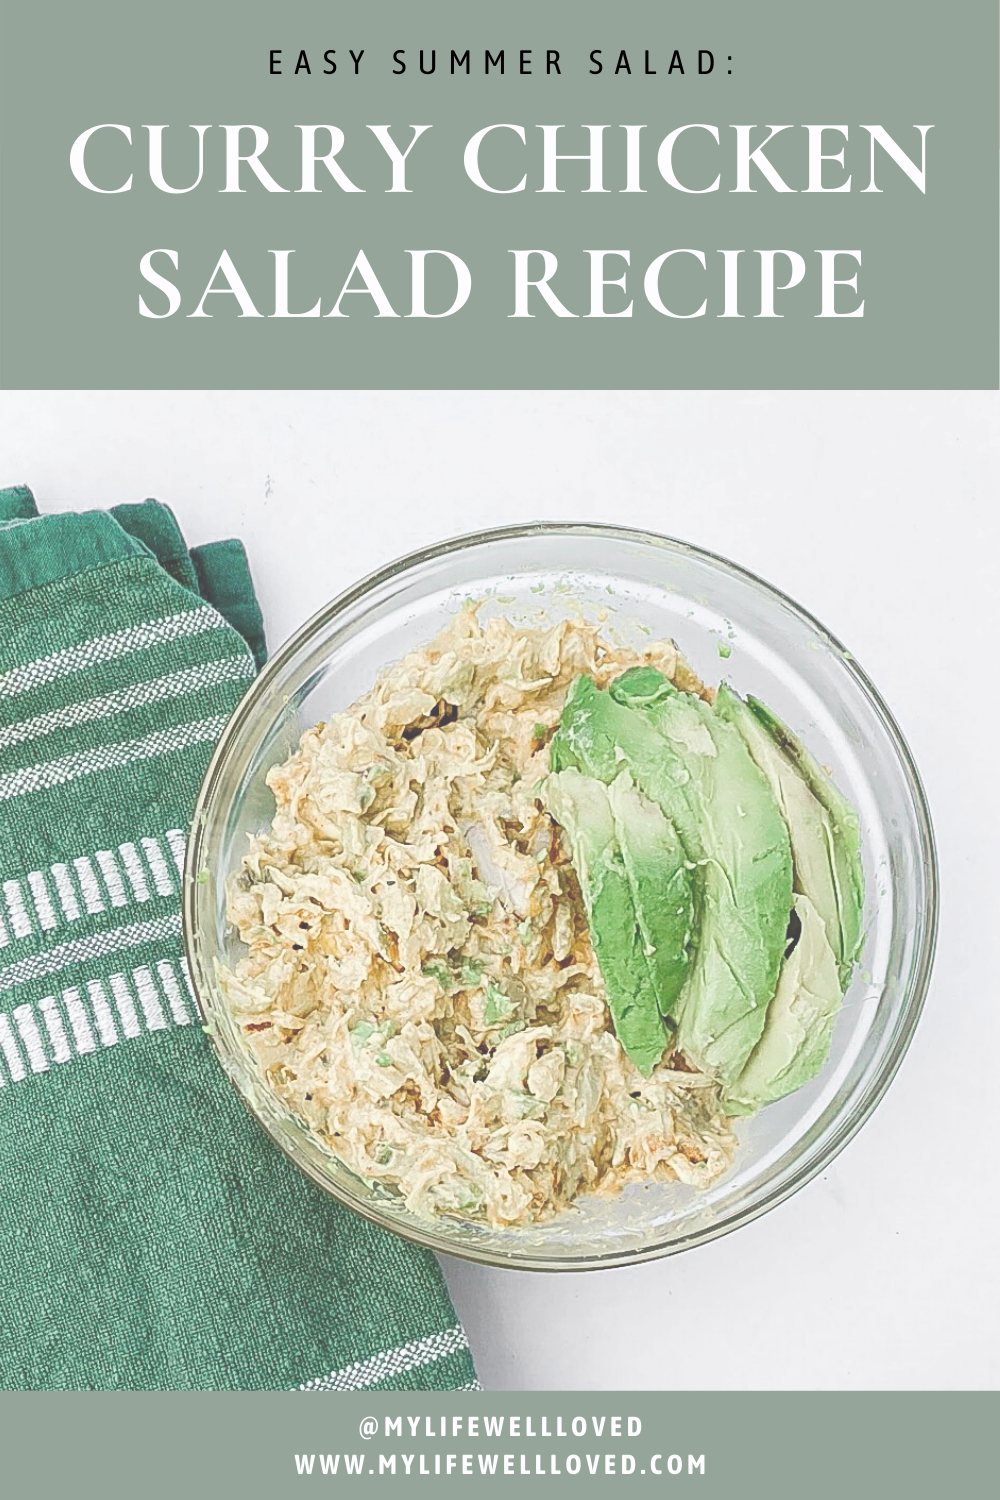 Curry Chicken Salad by Alabama Food + Lifestyle blogger, Heater Brown // My Life Well Loved